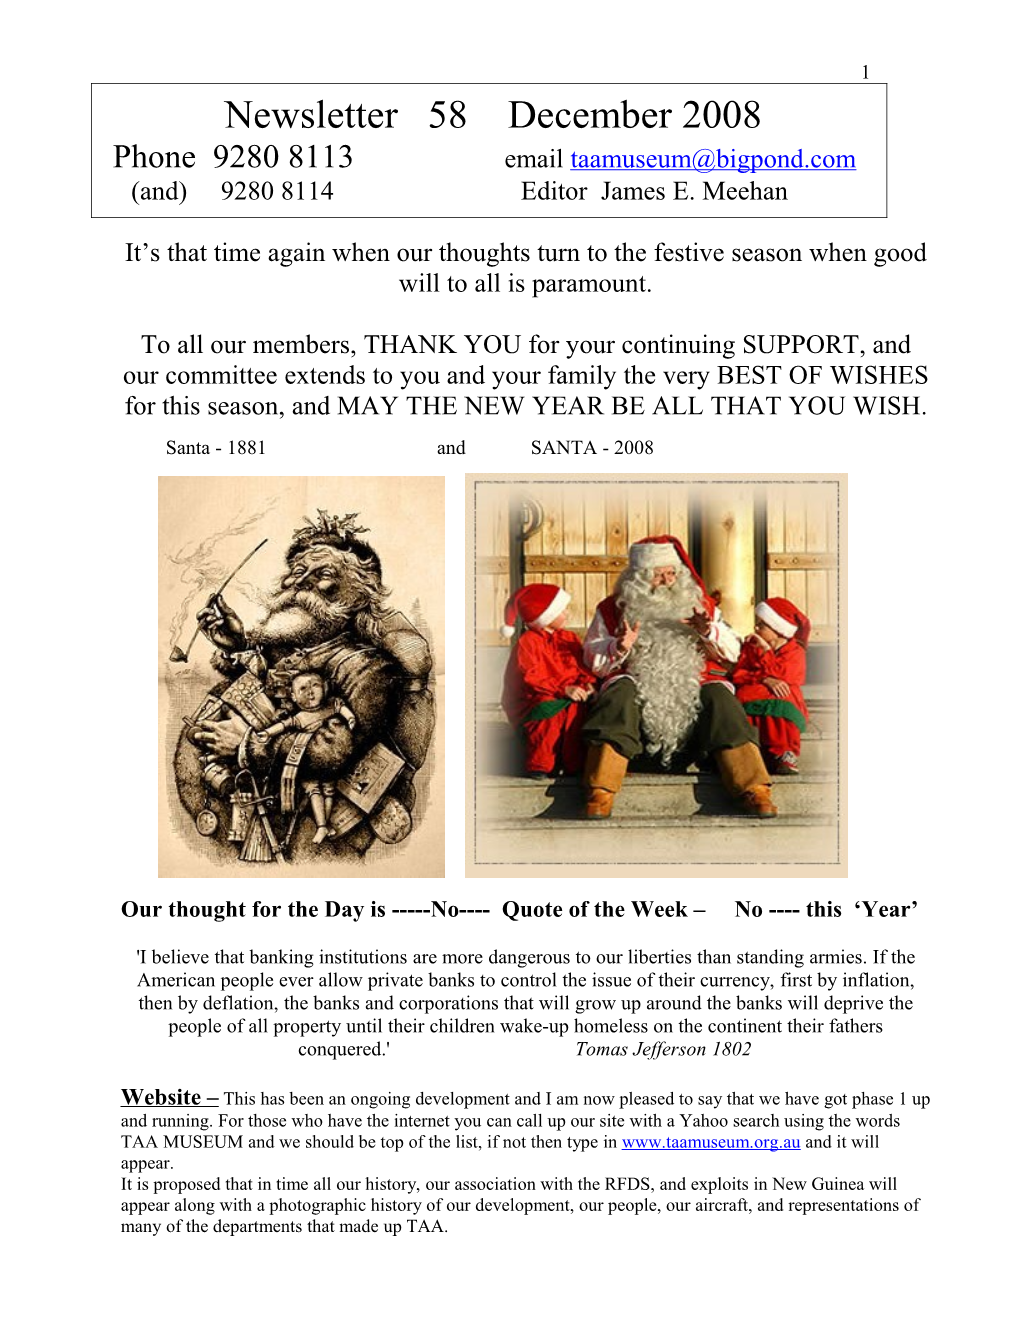 Newsletter 58 December 2008 Phone 9280 8113 Email Taamuseum@Bigpond.Com (And) 9280 8114 Editor James E